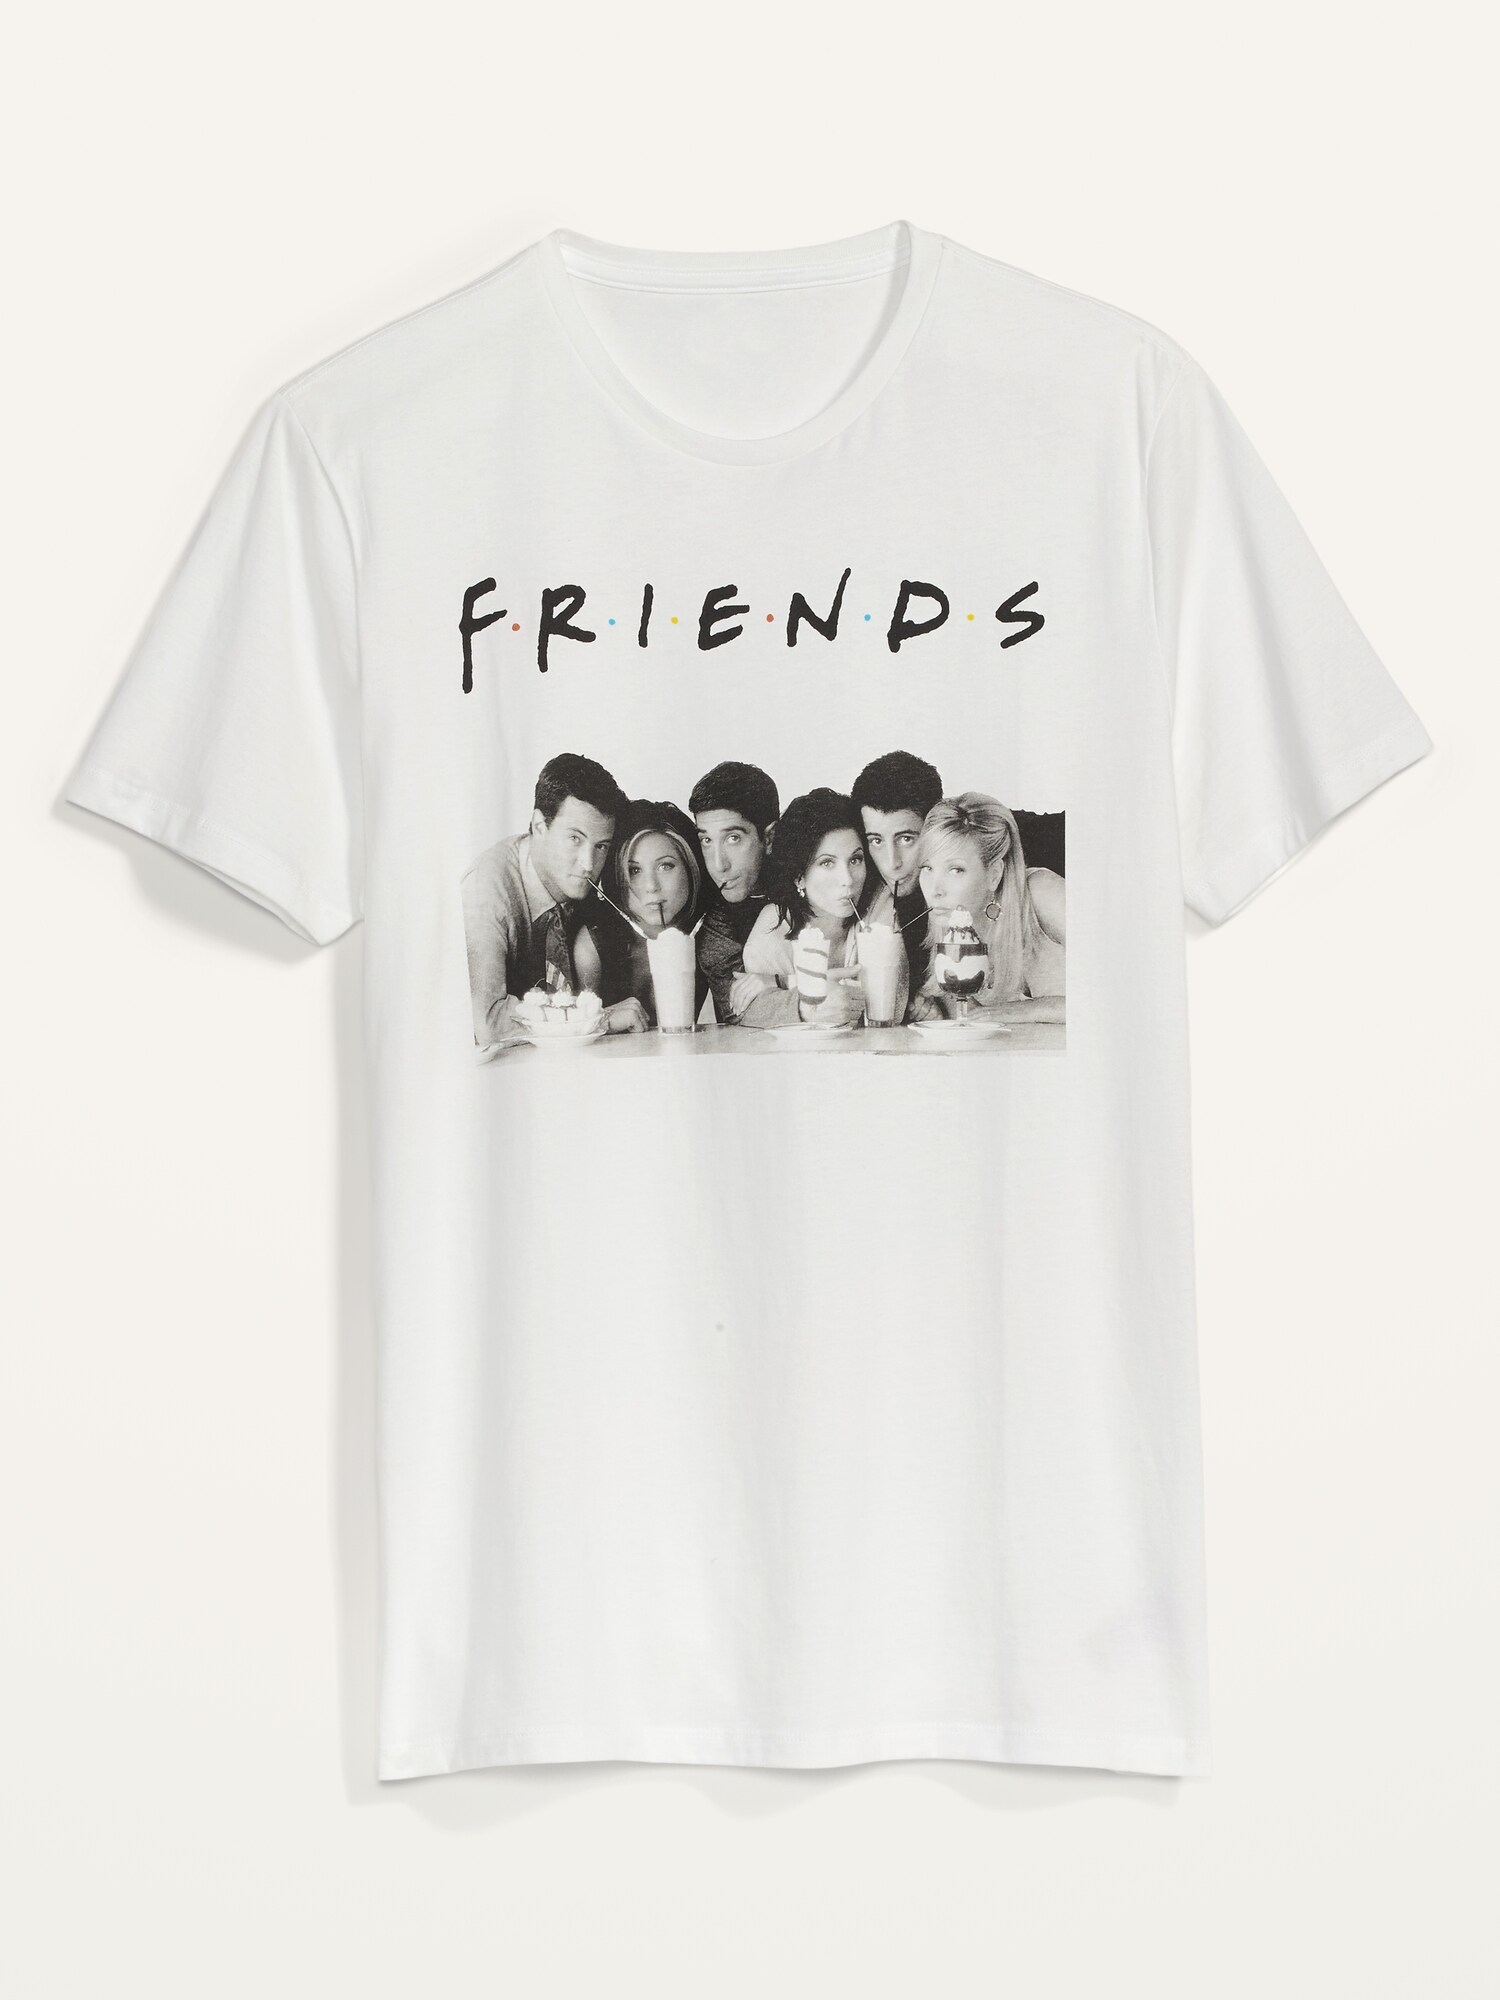 Friends™ Graphic Gender-Neutral Tee for Adults | Old Navy